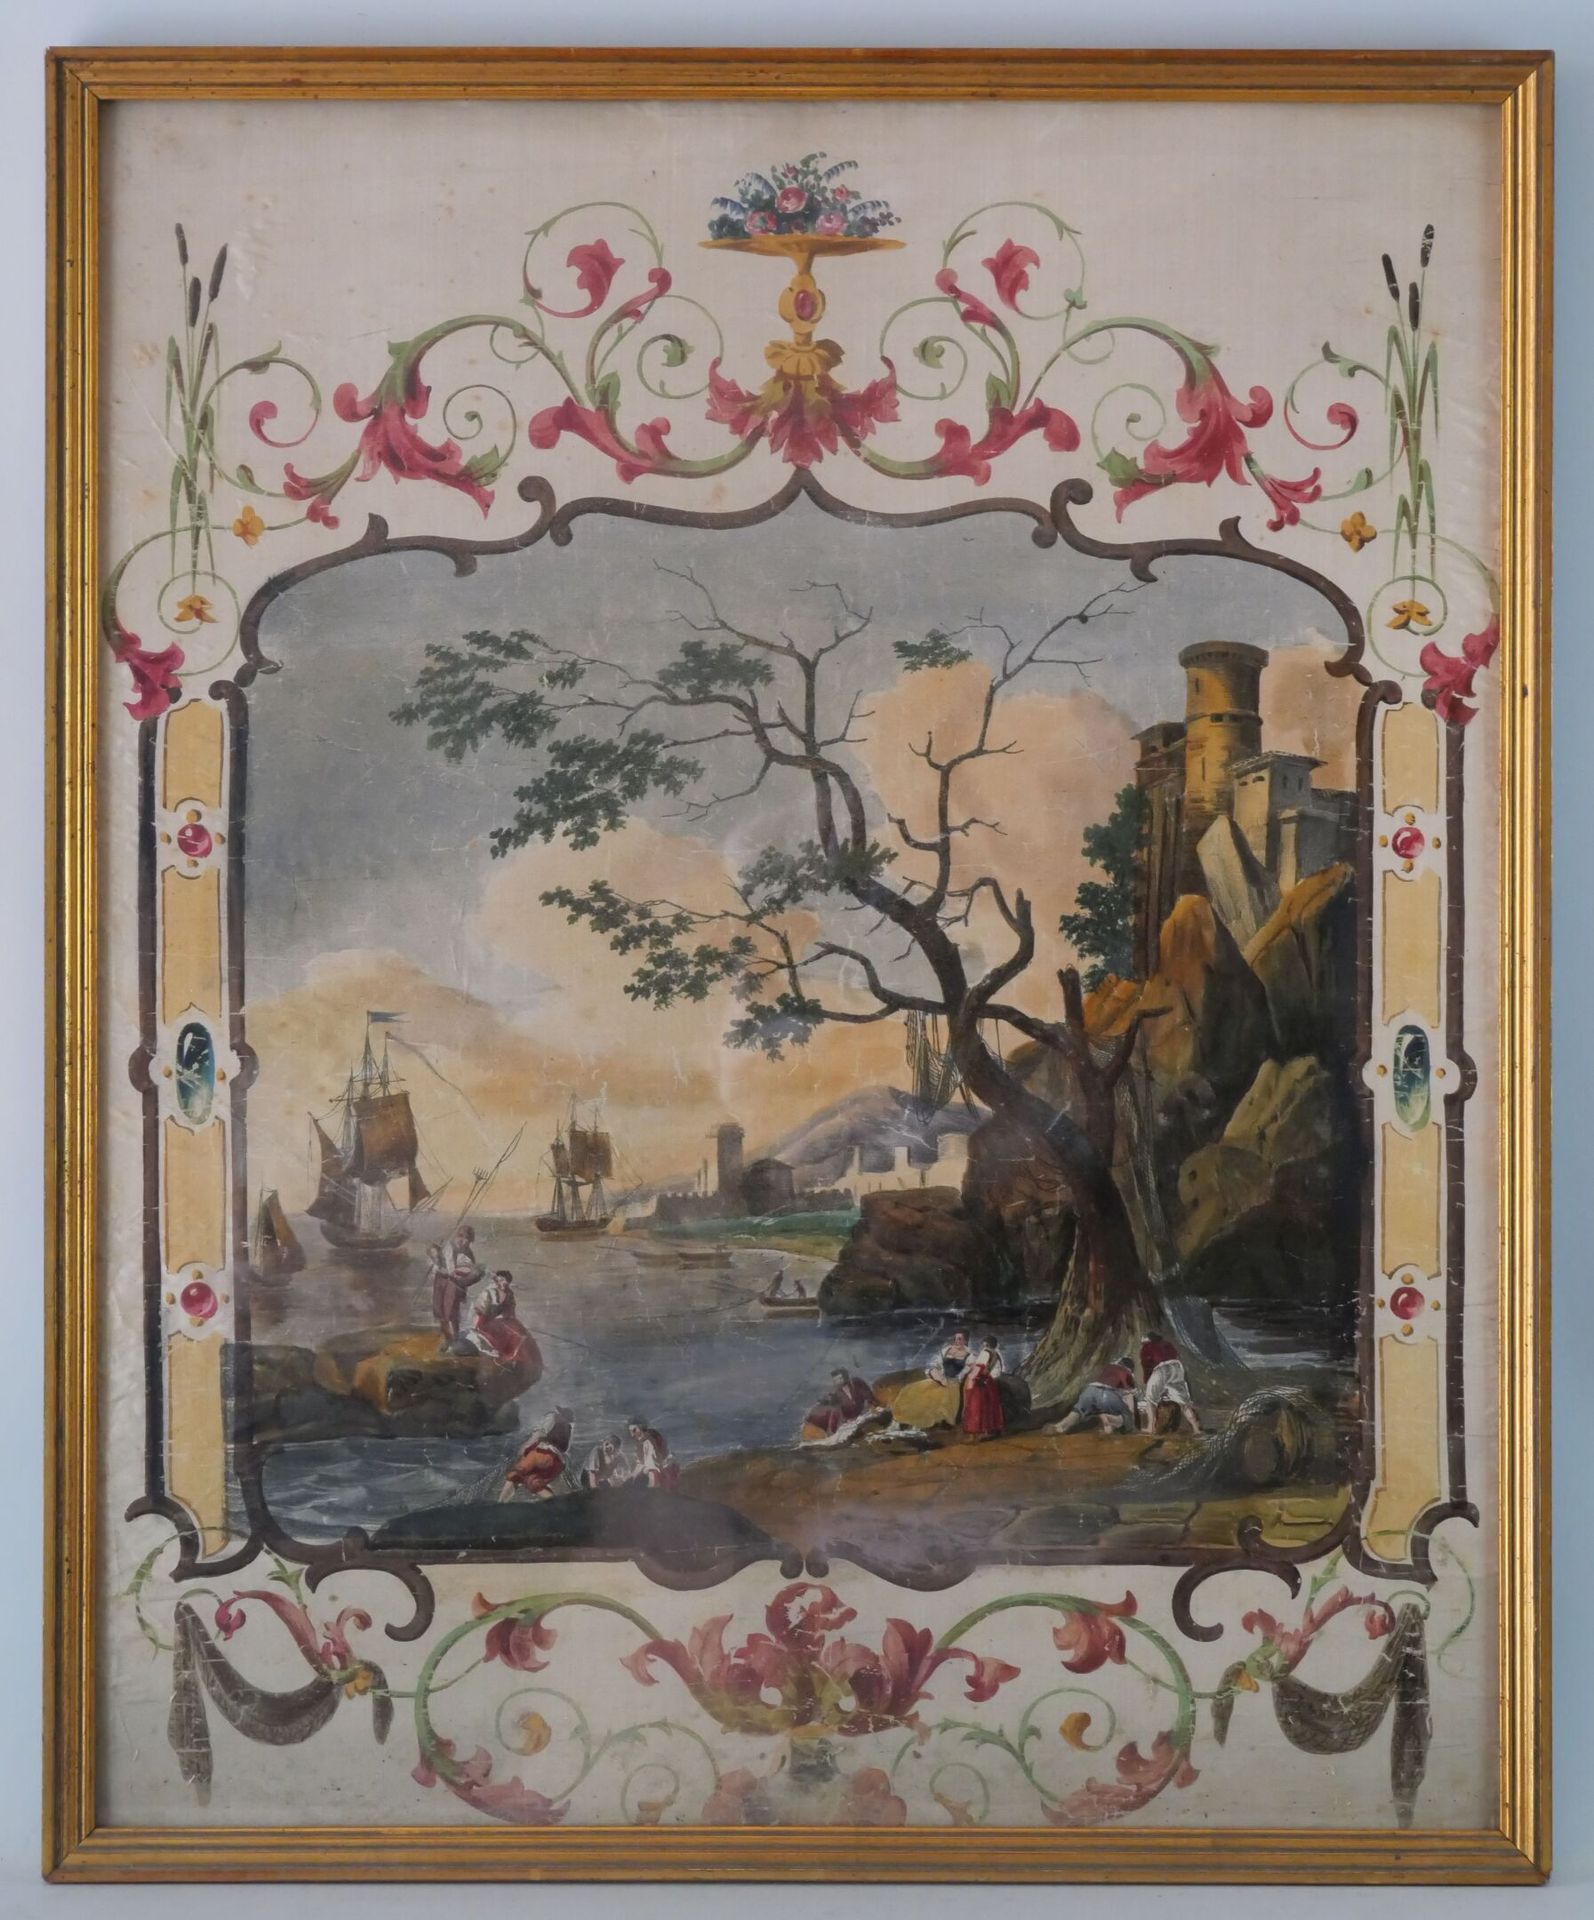 Null French school around 1800

Port landscape for a wood panel

Watercolor and &hellip;